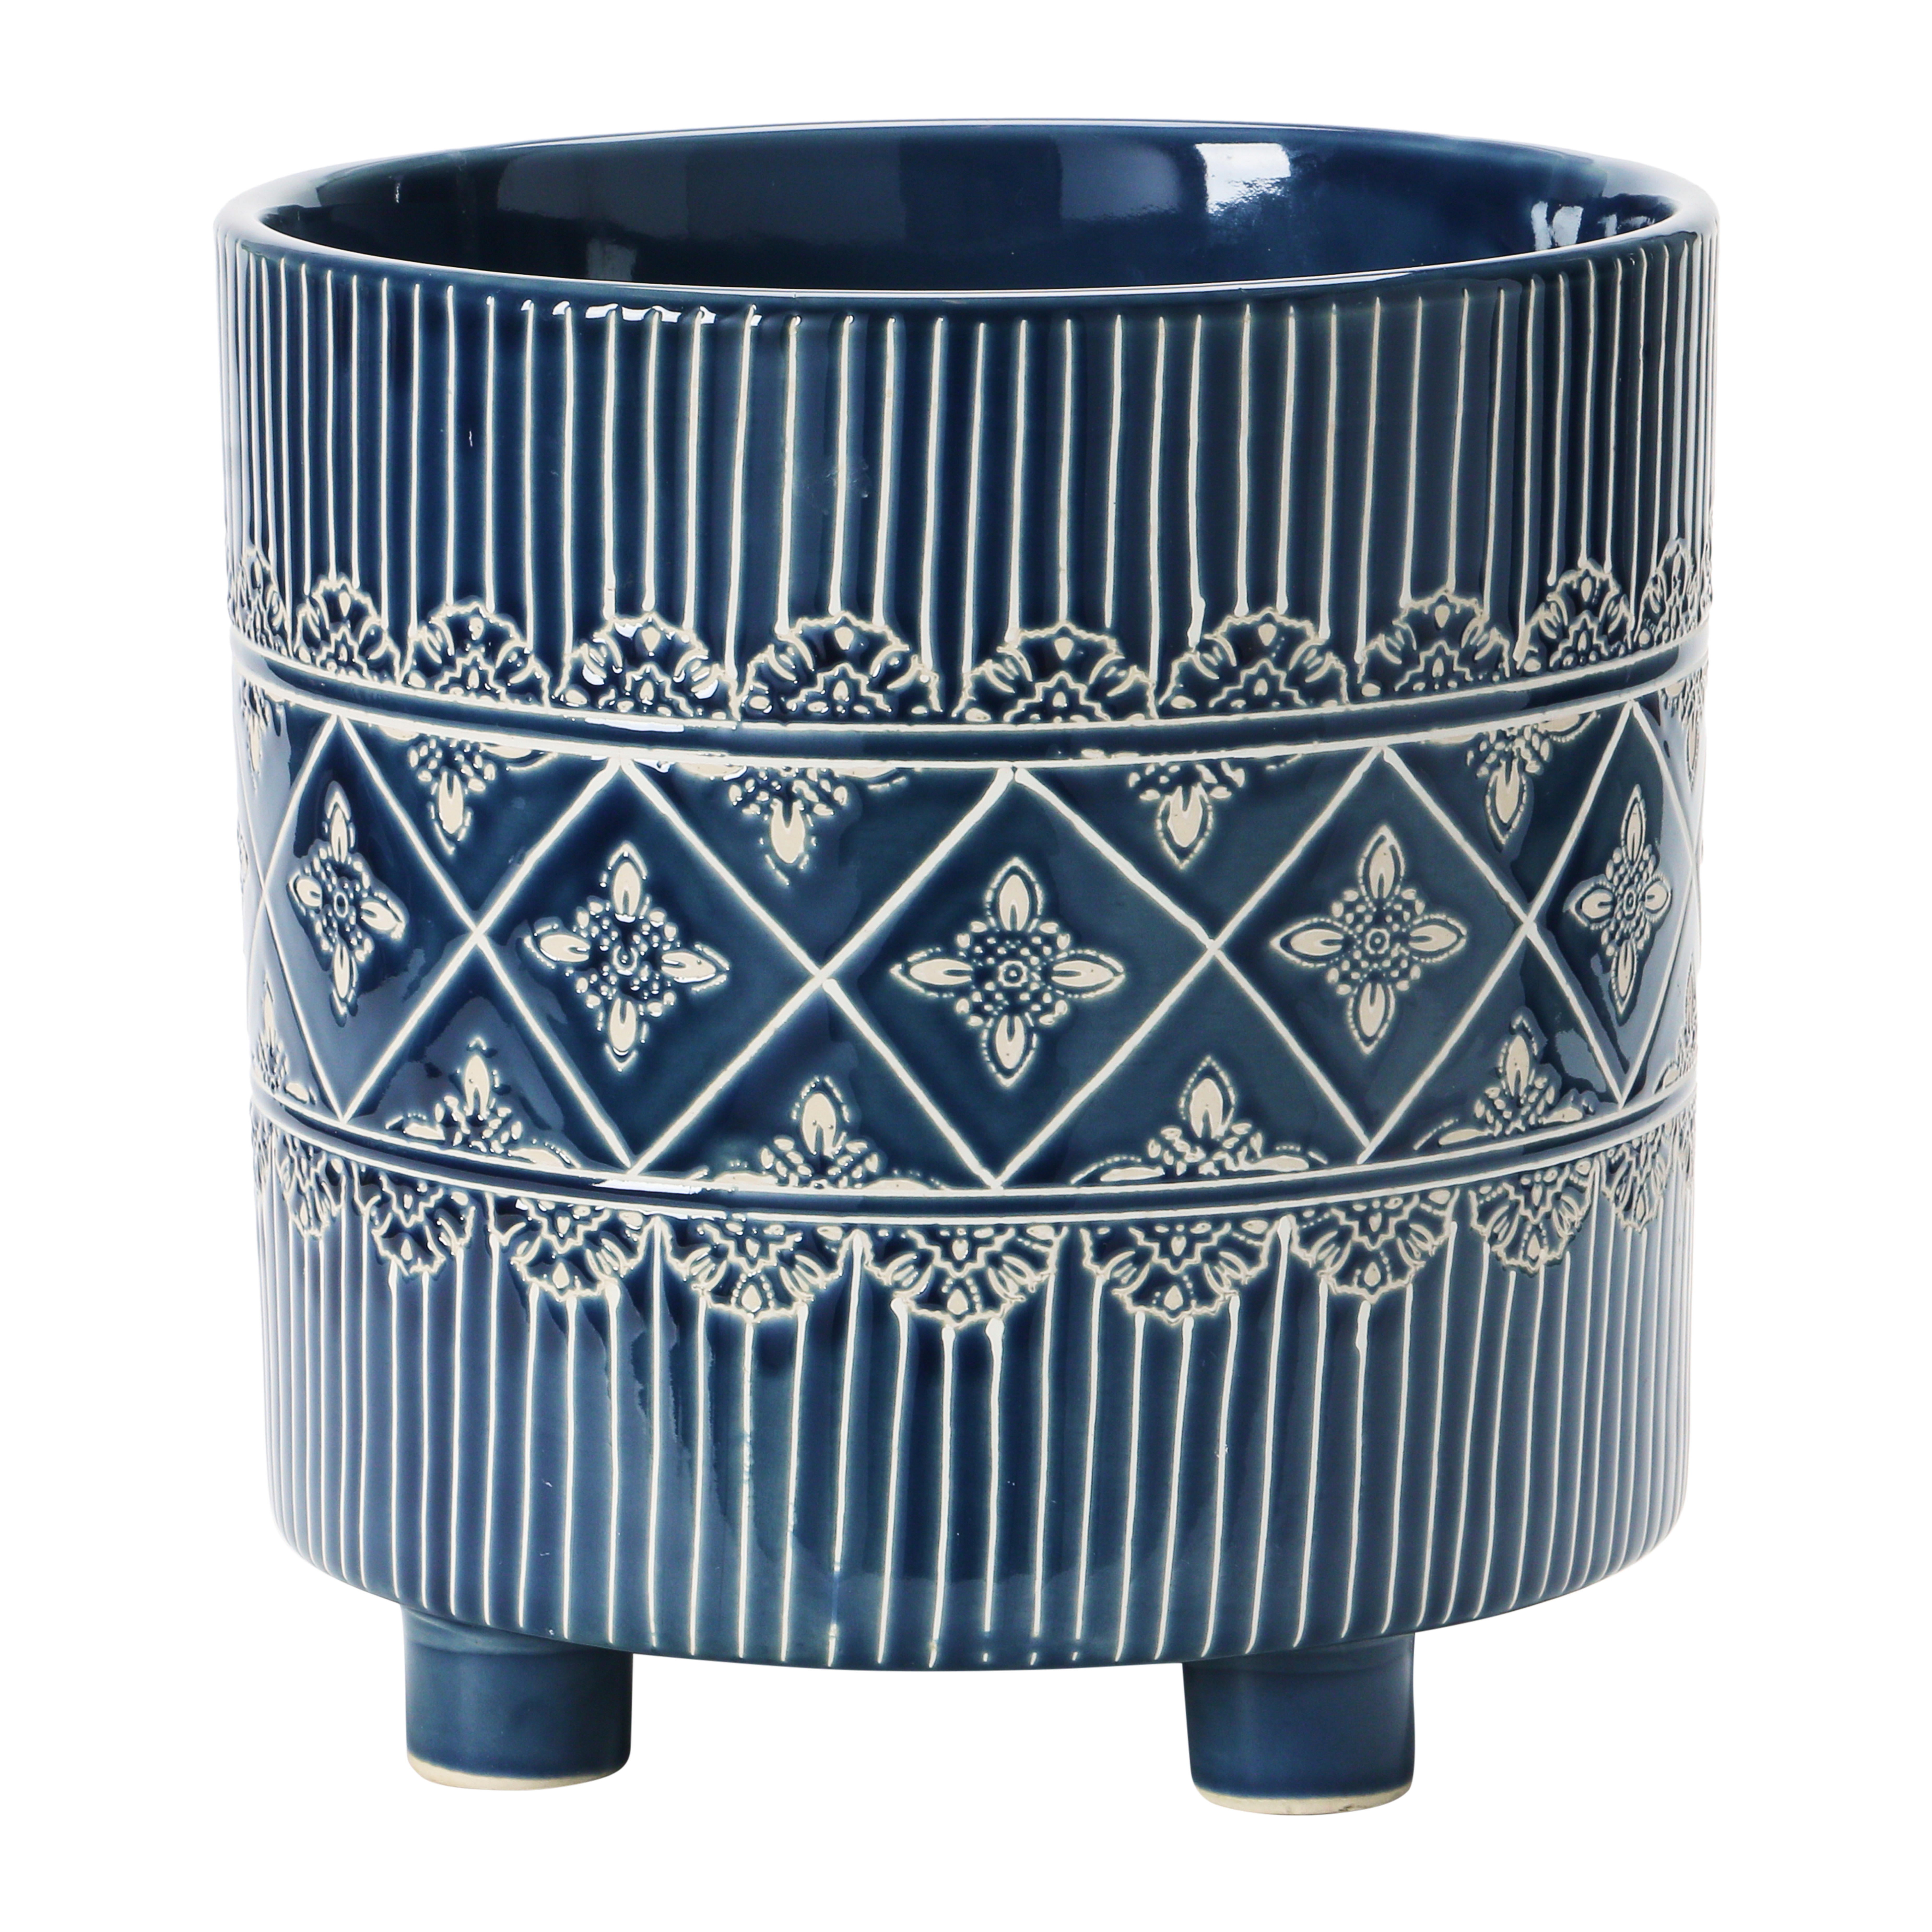 Debossed Stoneware Footed Planter with Pattern, Blue & White (Holds 9" Pot) - Nomad Home